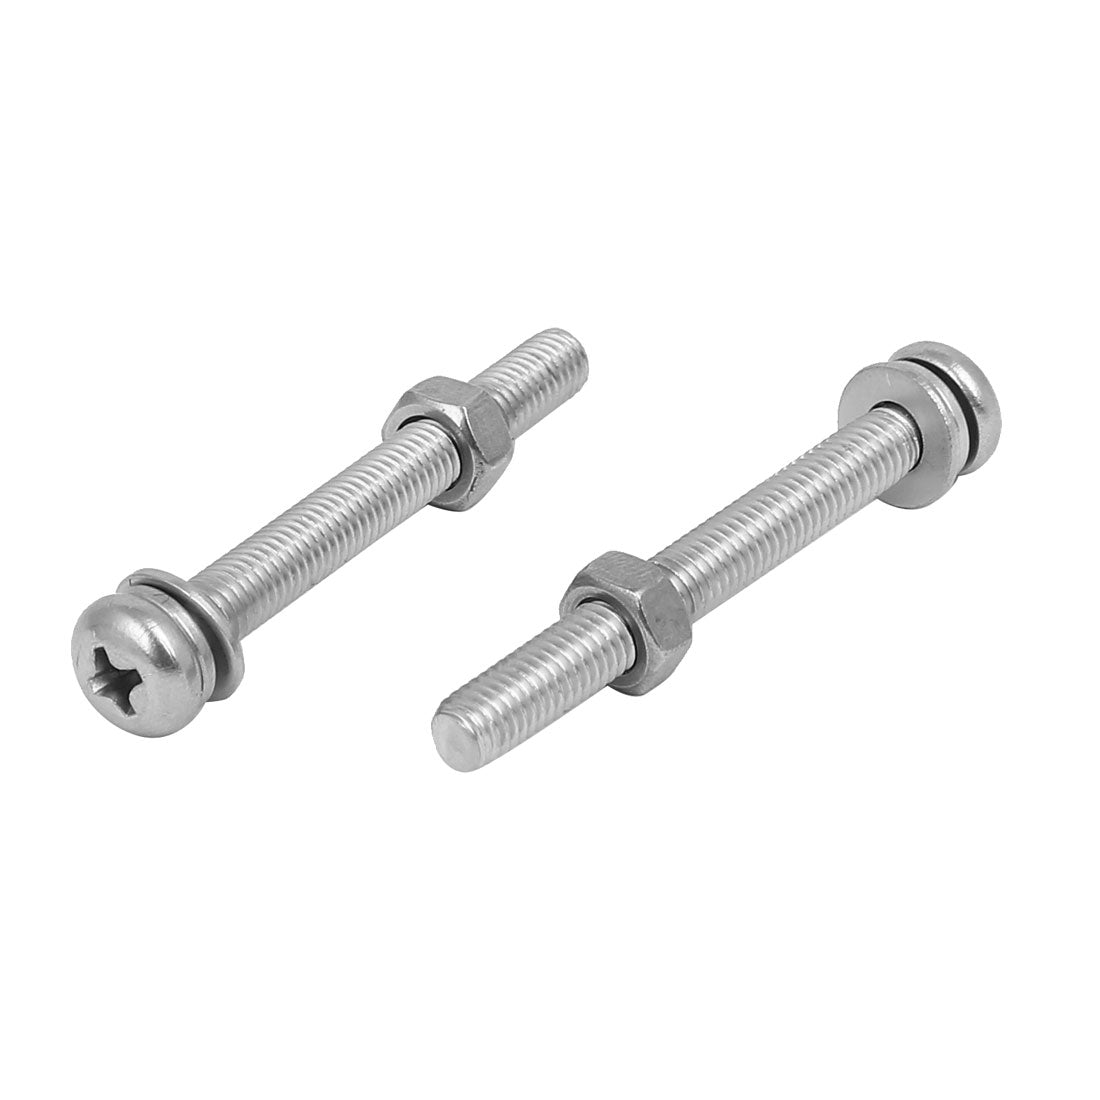 uxcell Uxcell M5 x 45mm 304 Stainless Steel Phillips Pan Head Screws Nuts w Washers 10 Sets